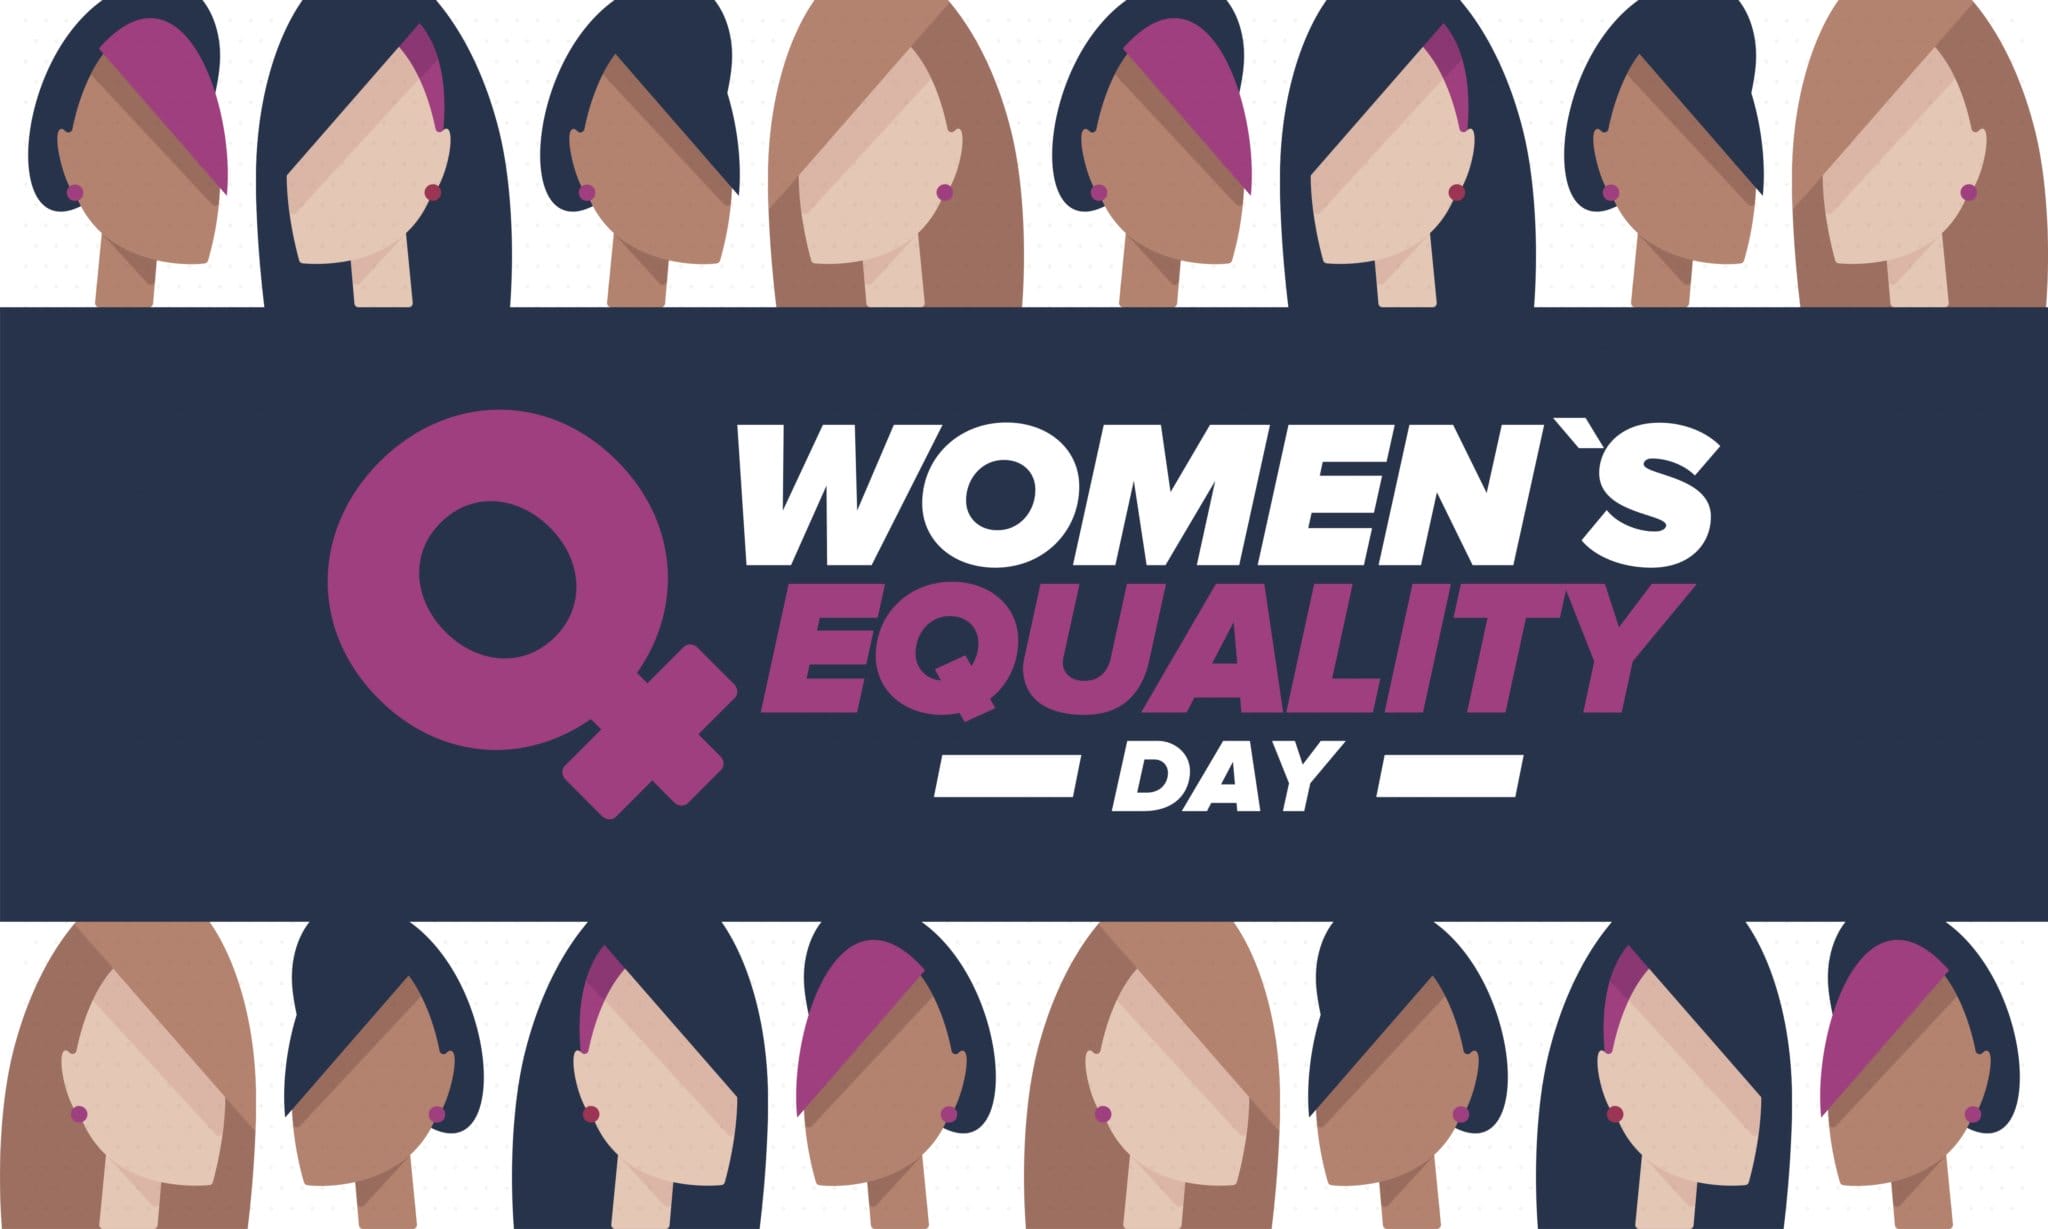 Recognizing Inequality in Women’s Equality Day and the Urgent Need for